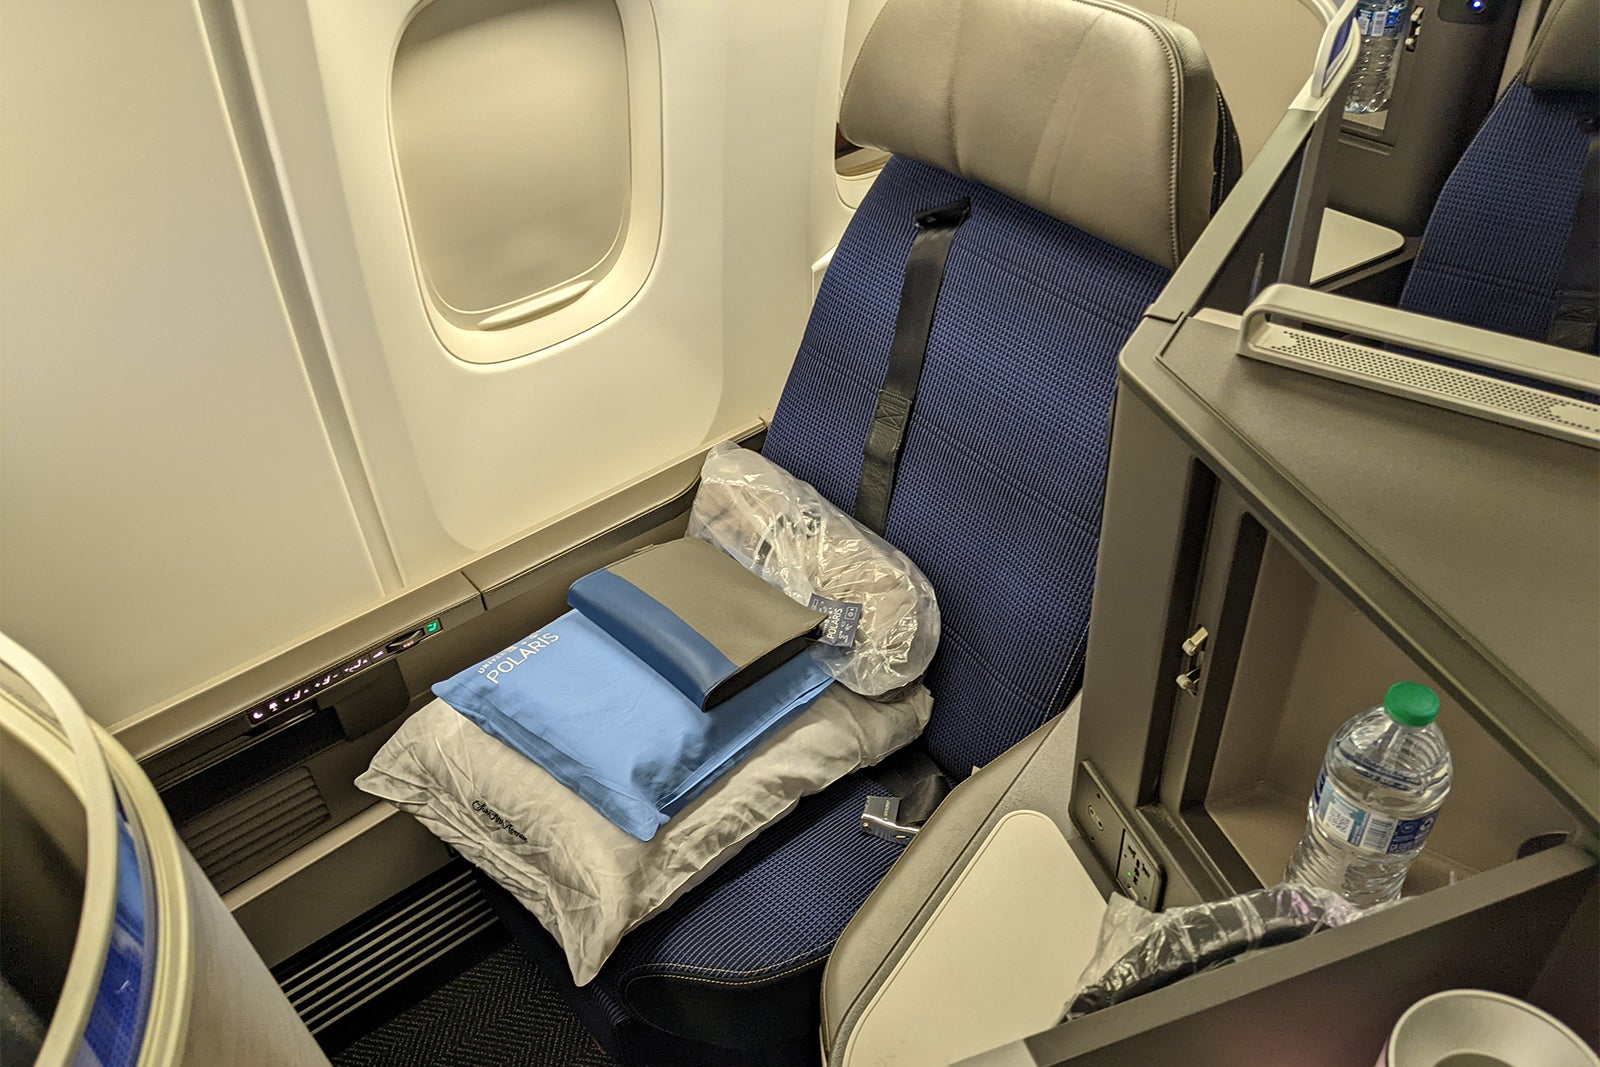 Polaris business class seat on a United airplane